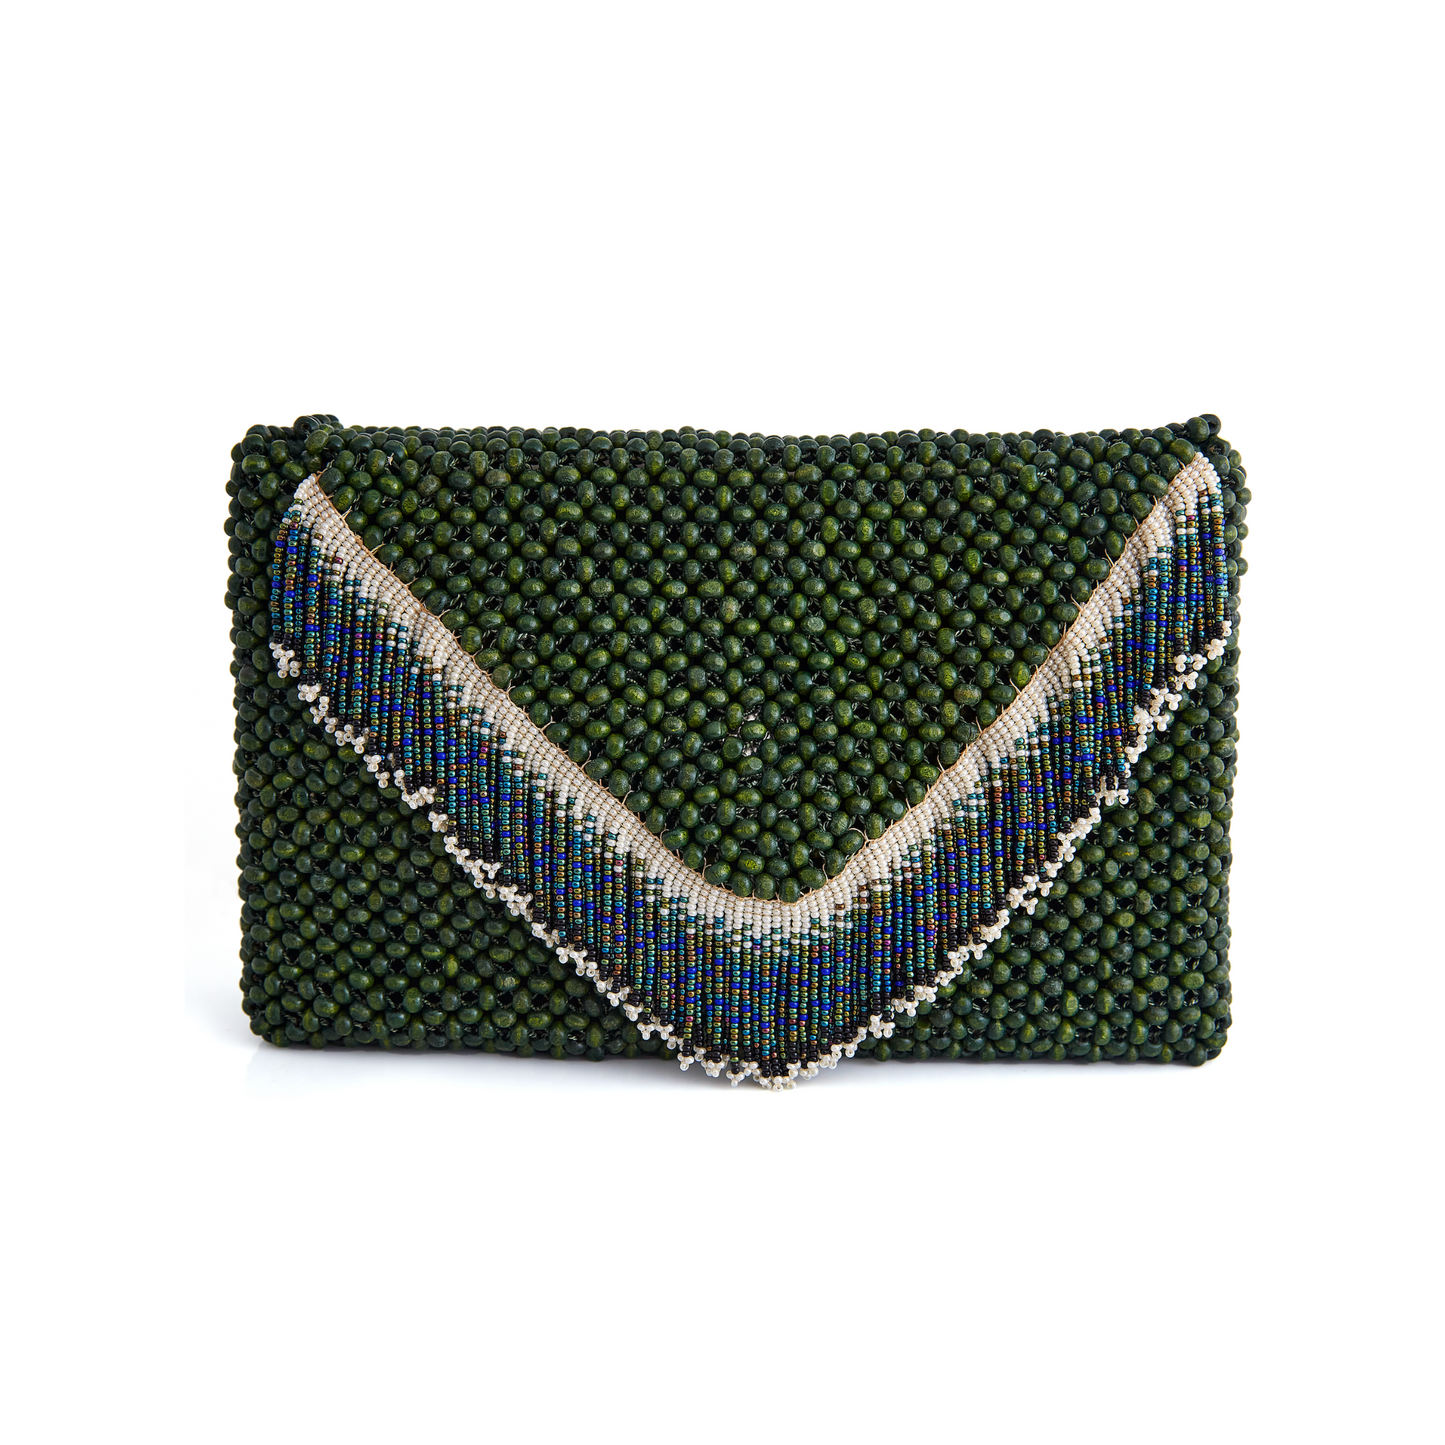 Waterfall Clutch Olive